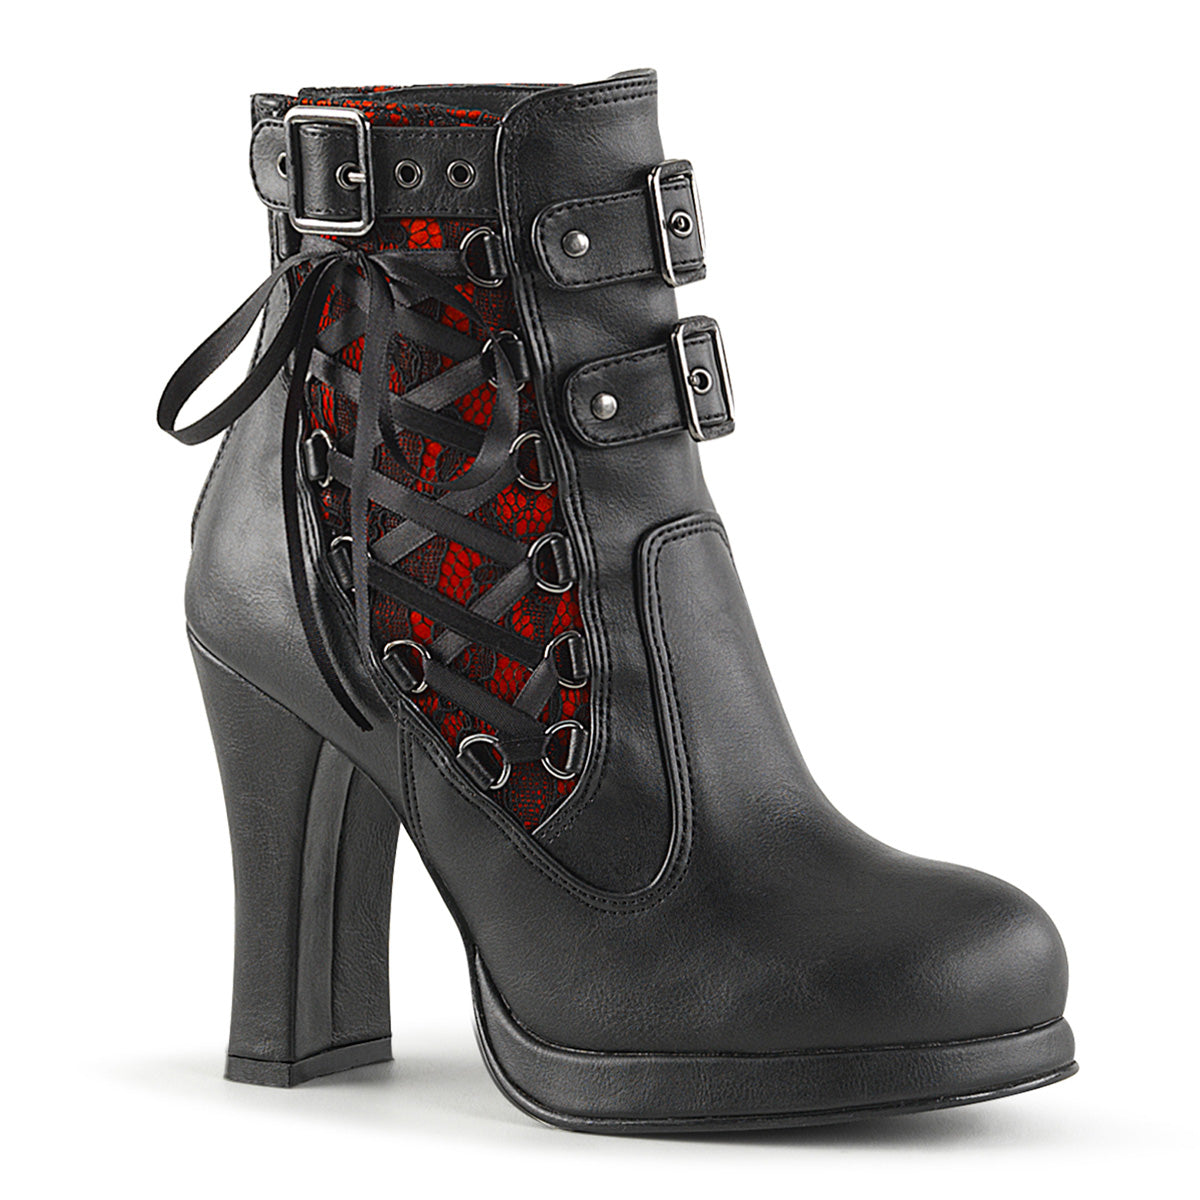 CRYPTO-51 Alternative Footwear Demonia Women's Ankle Boots Blk-Red Lace Vegan Leather